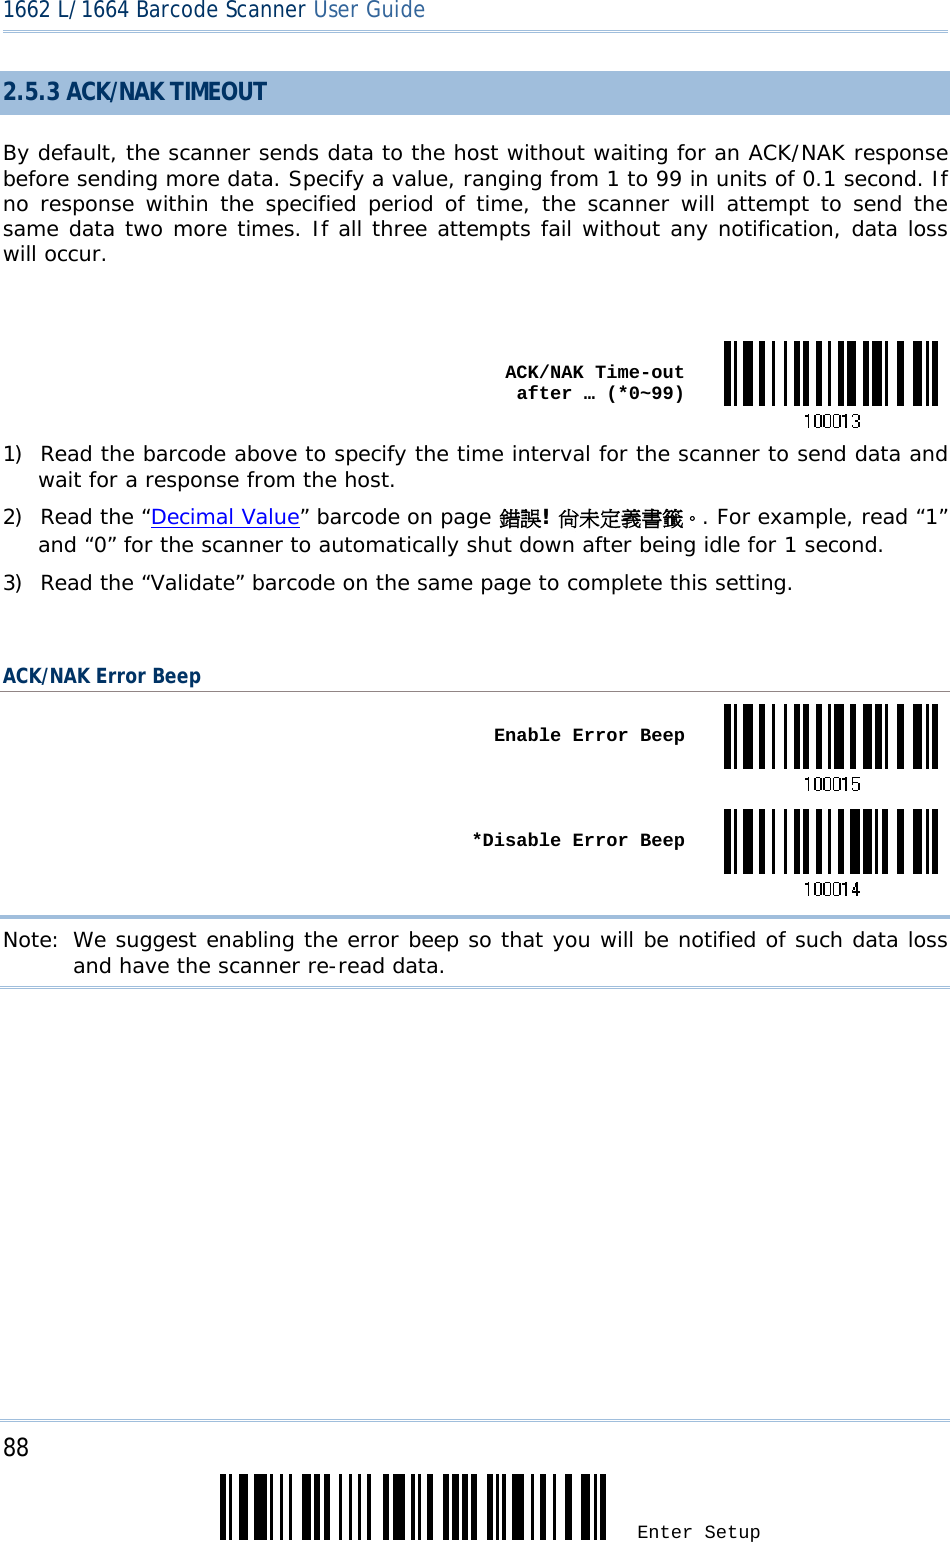 88 Enter Setup 1662 L/1664 Barcode Scanner User Guide  2.5.3 ACK/NAK TIMEOUT By default, the scanner sends data to the host without waiting for an ACK/NAK response before sending more data. Specify a value, ranging from 1 to 99 in units of 0.1 second. If no response within the specified period of time, the scanner will attempt to send the same data two more times. If all three attempts fail without any notification, data loss will occur.   ACK/NAK Time-out after … (*0~99)1) Read the barcode above to specify the time interval for the scanner to send data and wait for a response from the host.             2) Read the “Decimal Value” barcode on page 錯誤! 尚未定義書籤。. For example, read “1” and “0” for the scanner to automatically shut down after being idle for 1 second.  3) Read the “Validate” barcode on the same page to complete this setting.  ACK/NAK Error Beep  Enable Error Beep *Disable Error BeepNote: We suggest enabling the error beep so that you will be notified of such data loss and have the scanner re-read data.    